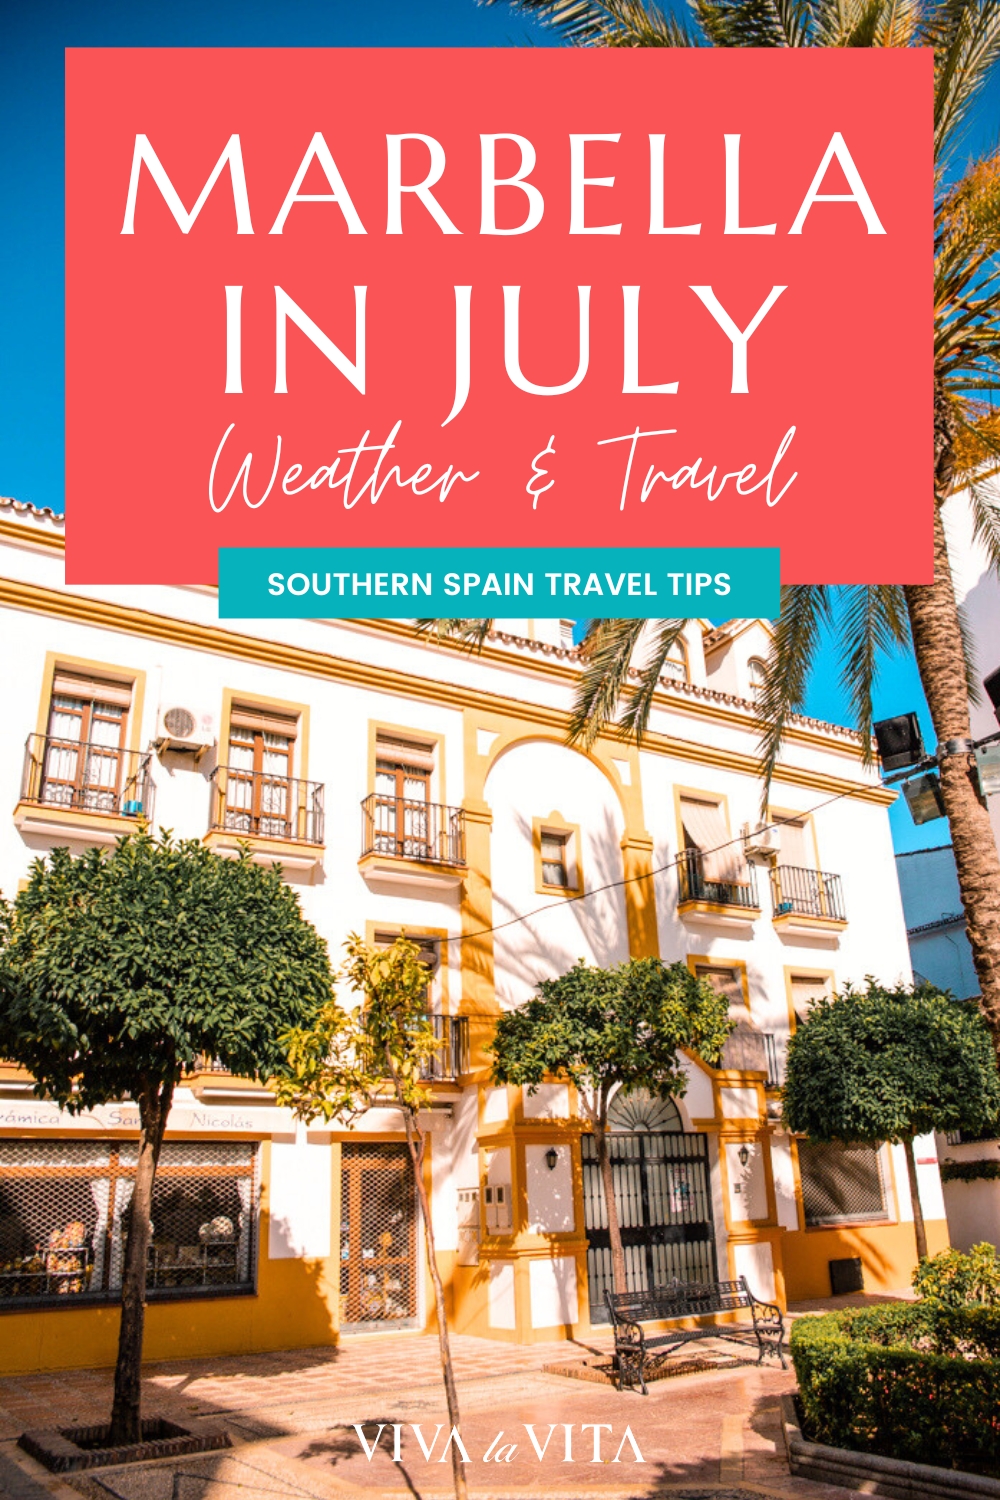 Pinterest image showing Marbella old town with a headline - Marbella in July weather and travel, Southern Spain Travel tips